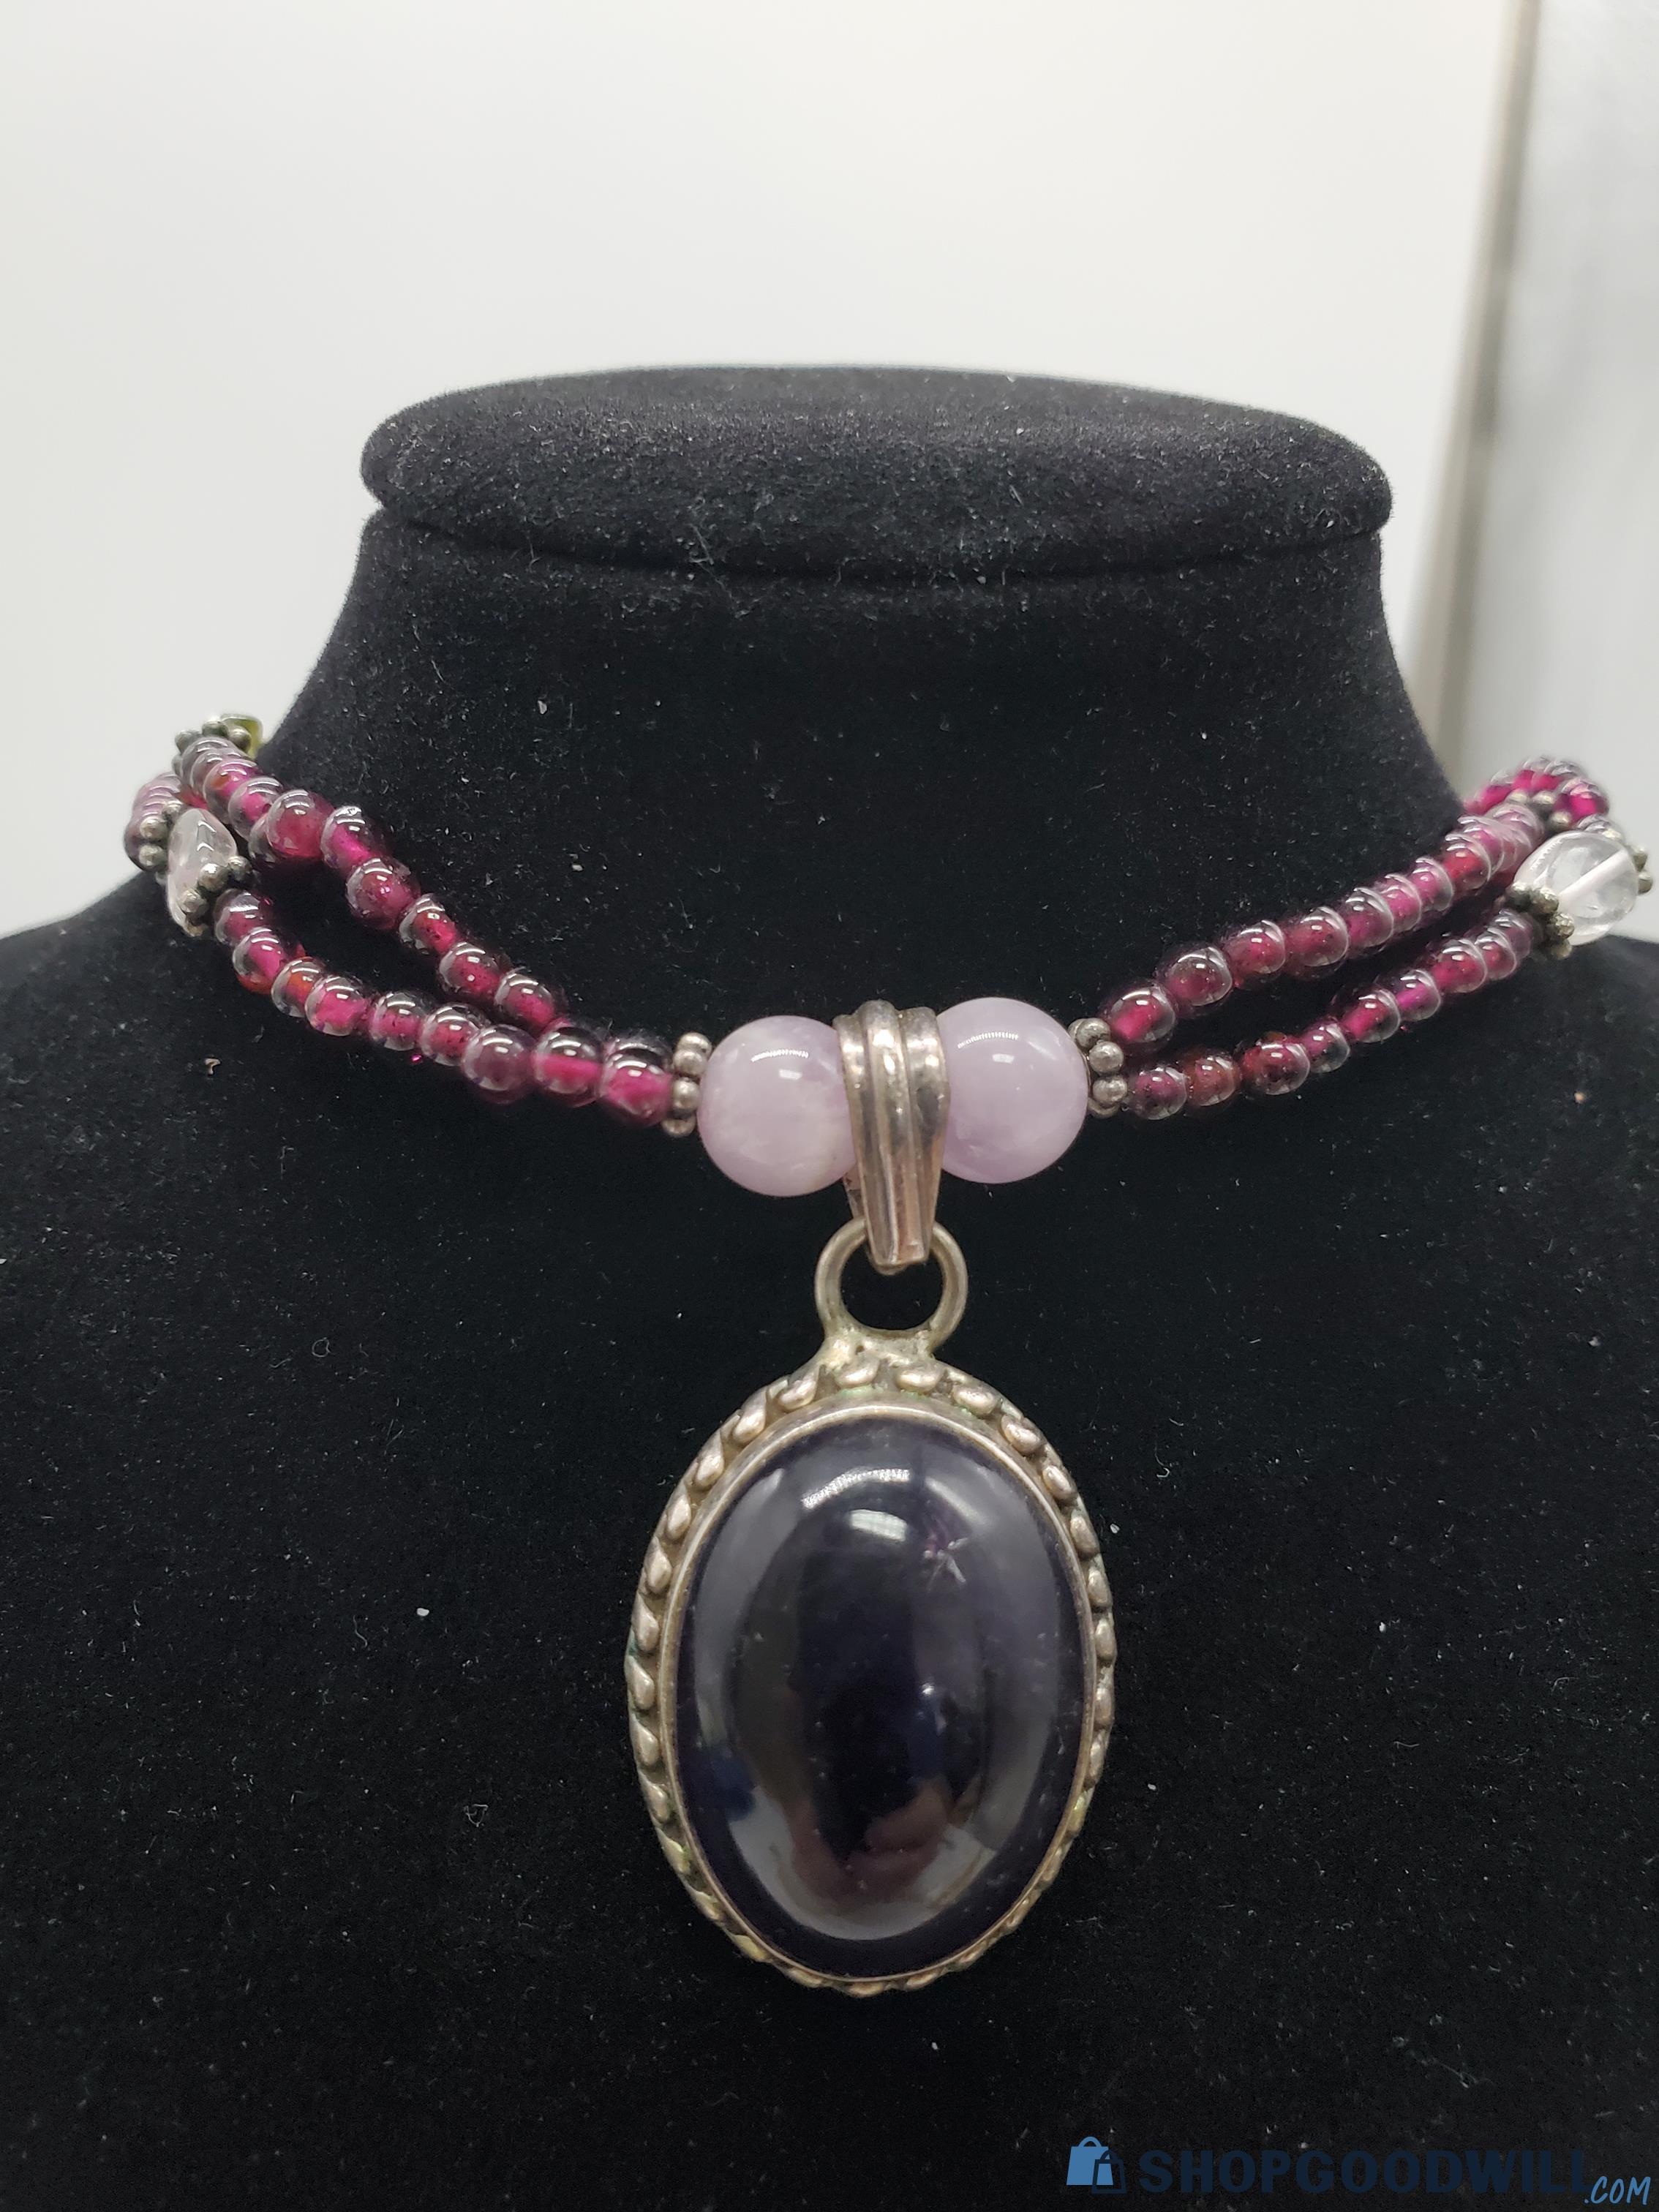 Gemstone Bead Necklace With Sterling Closure & Pendant- 17 Inches ...